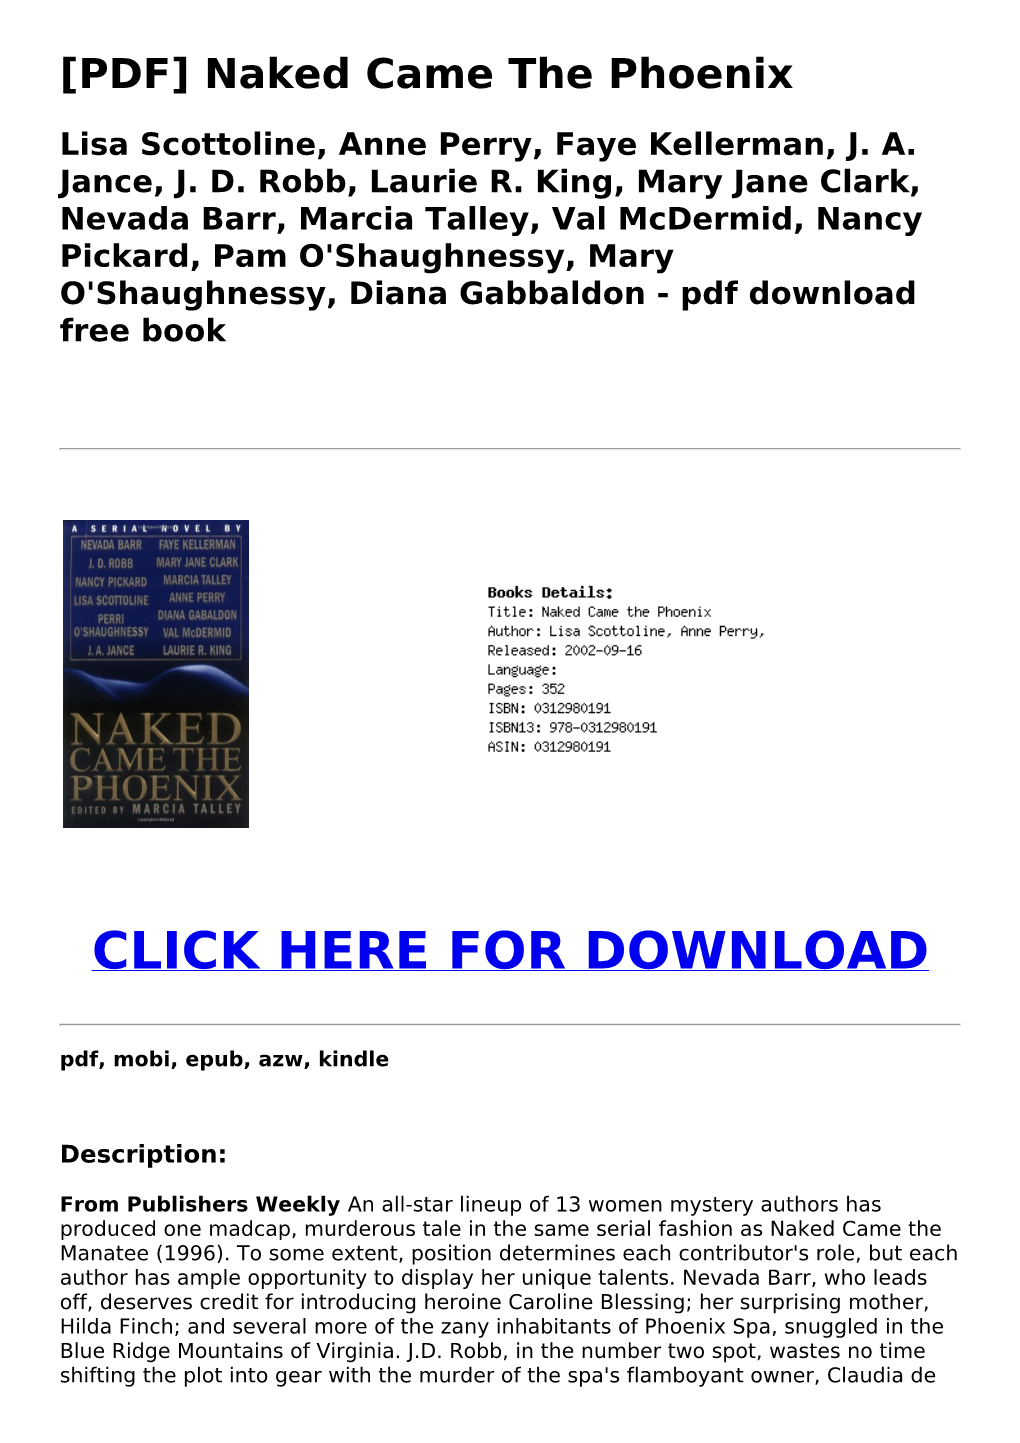 [PDF] Naked Came the Phoenix Lisa Scottoline, Anne Perry, Faye